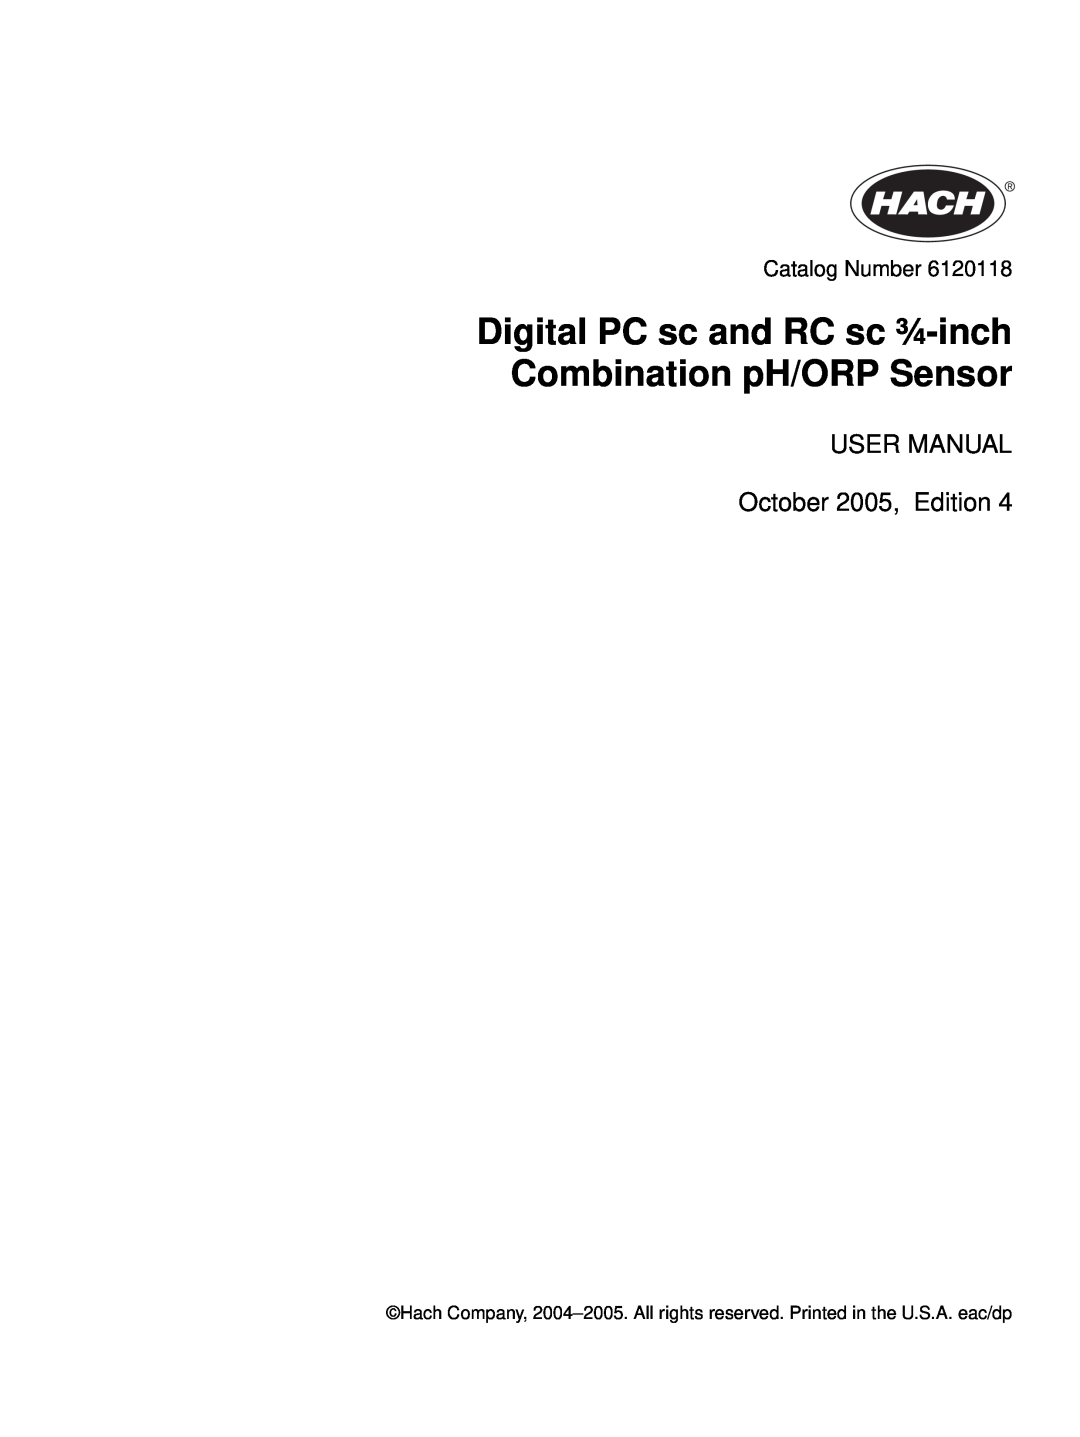 Hach 6120118 user manual Digital PC sc and RC sc ¾-inch Combination pH/ORP Sensor, USER MANUAL October 2005, Edition 